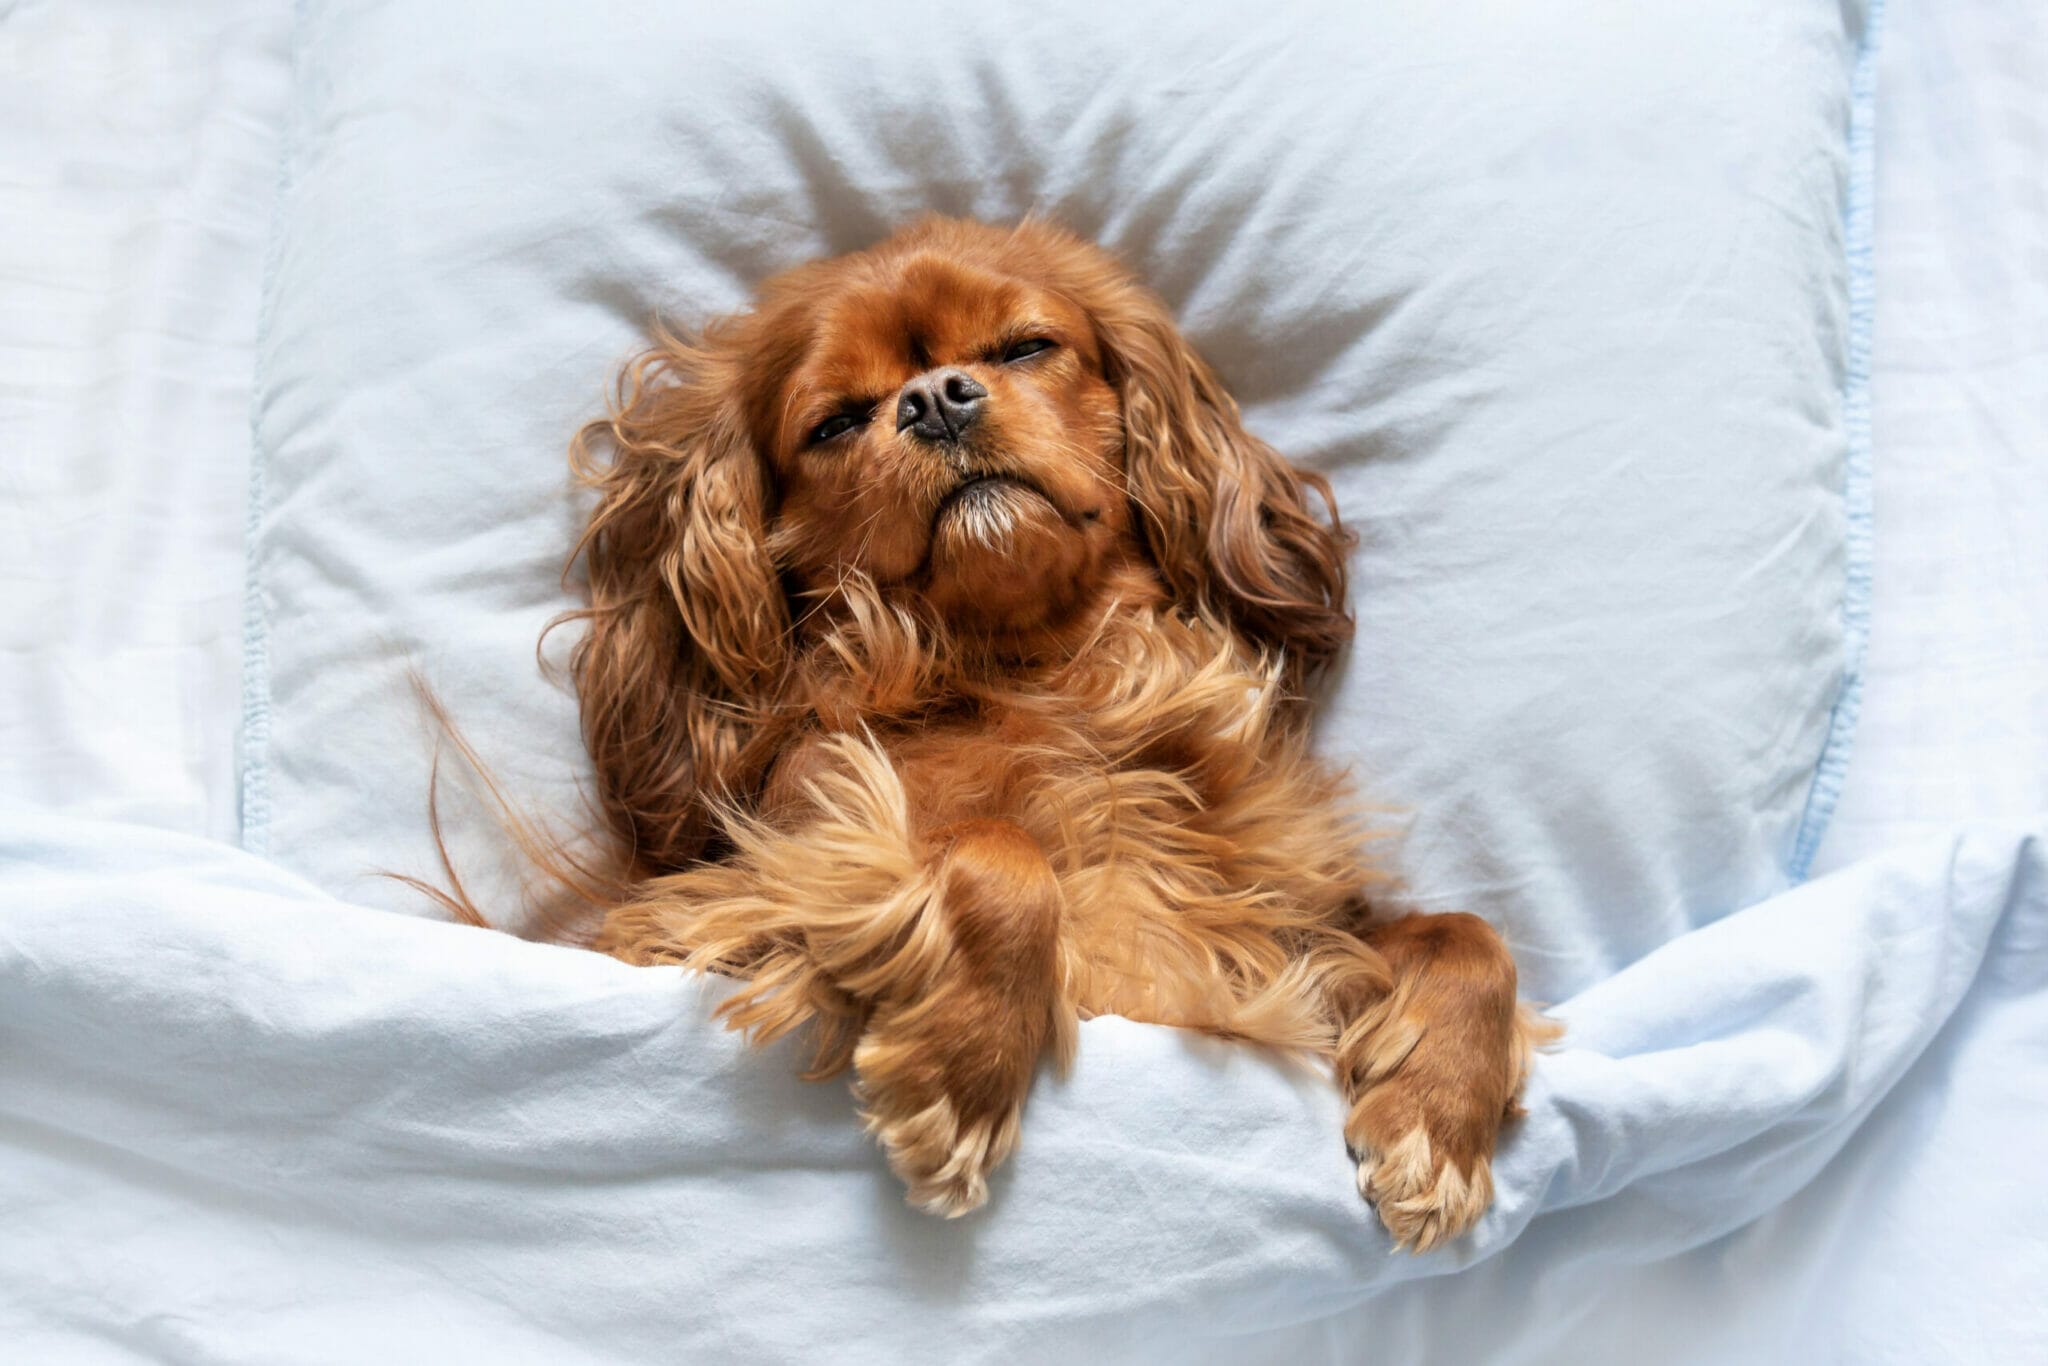 Should you be worried if your dog is howling in its sleep?